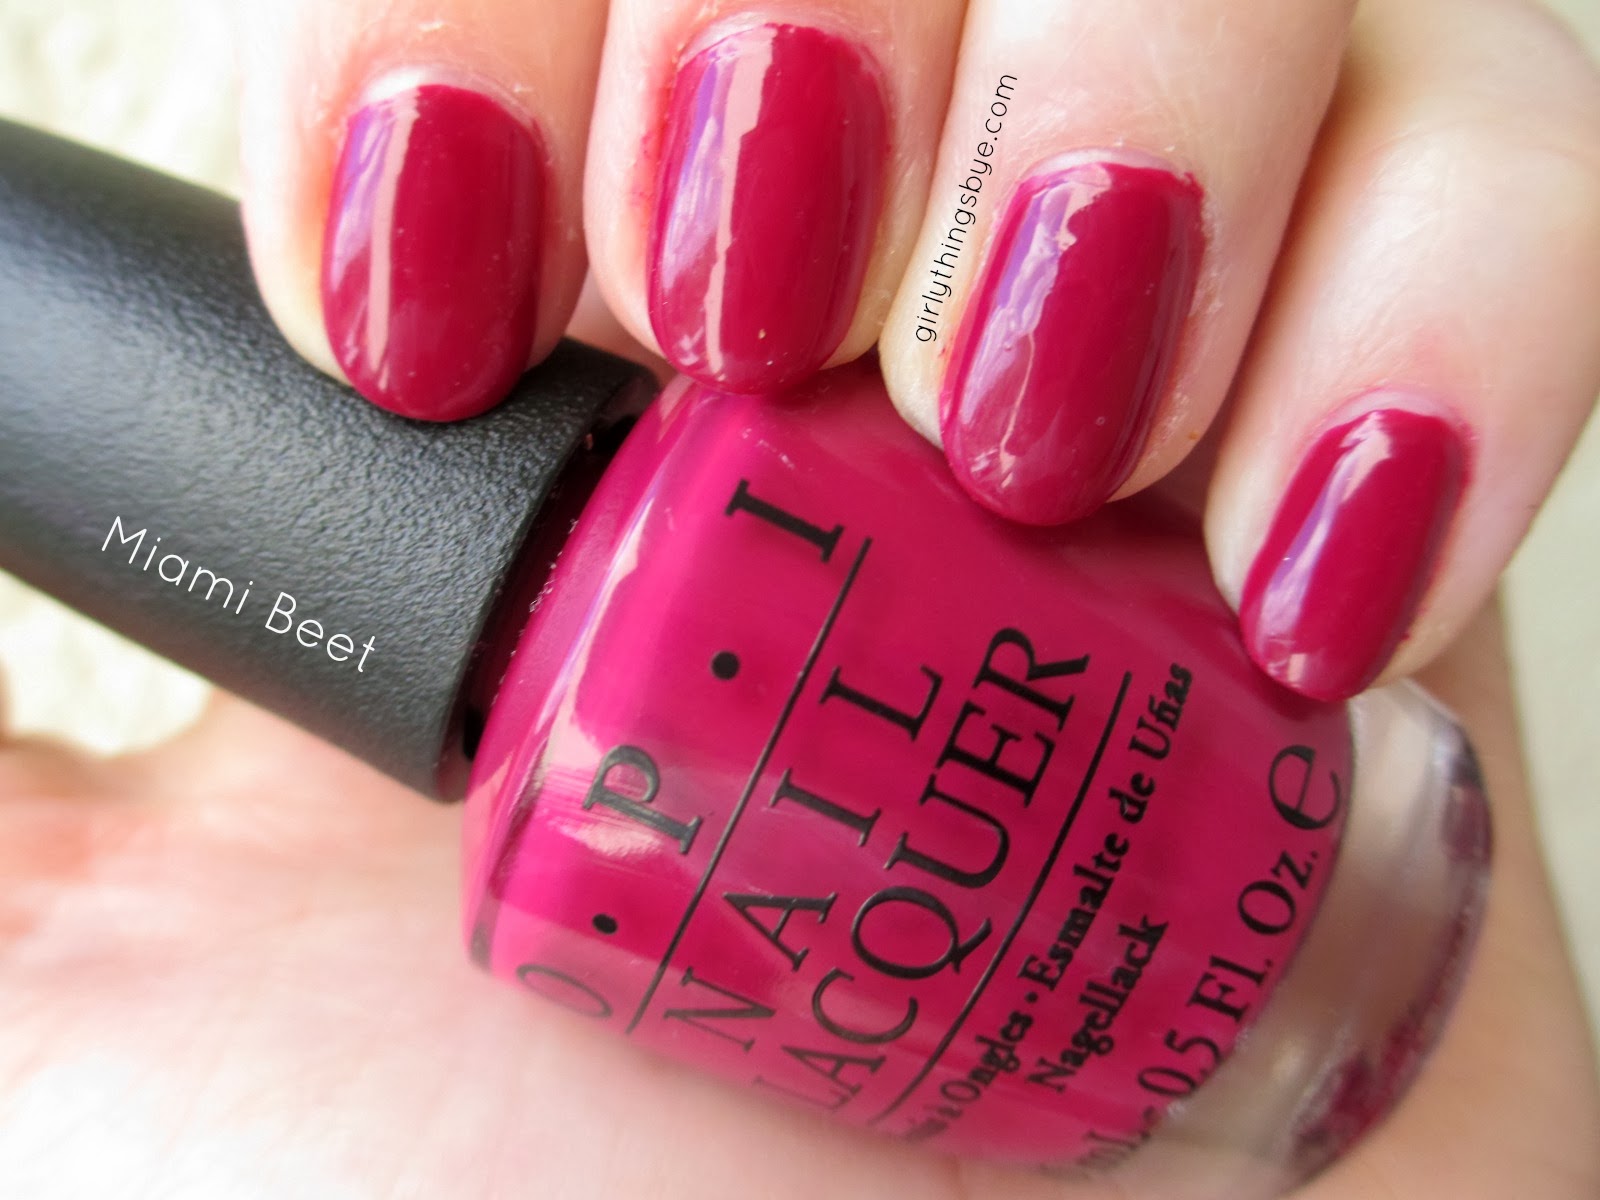 6. OPI "Miami Beet" from the South Beach Collection - wide 2